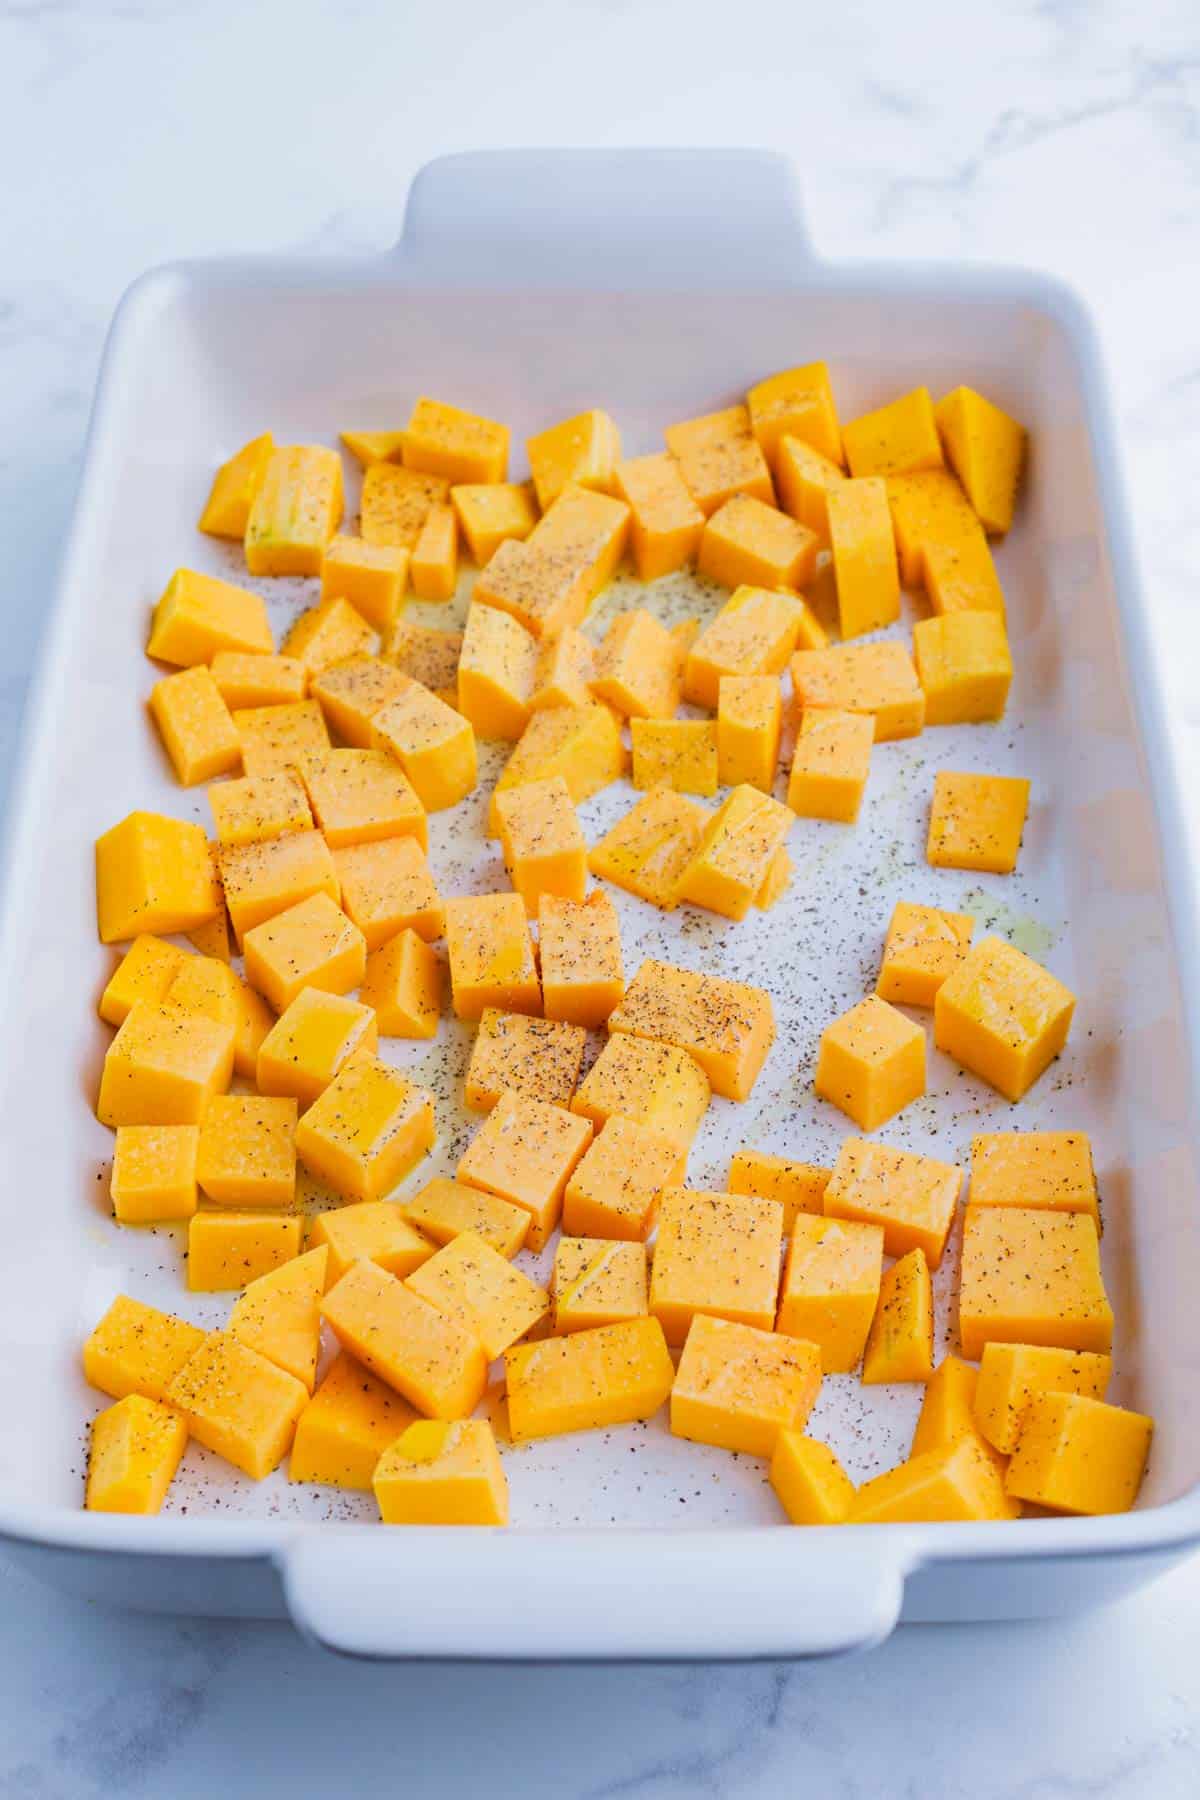 Cubed butternut squash in a white casserole dish ready for the oven.